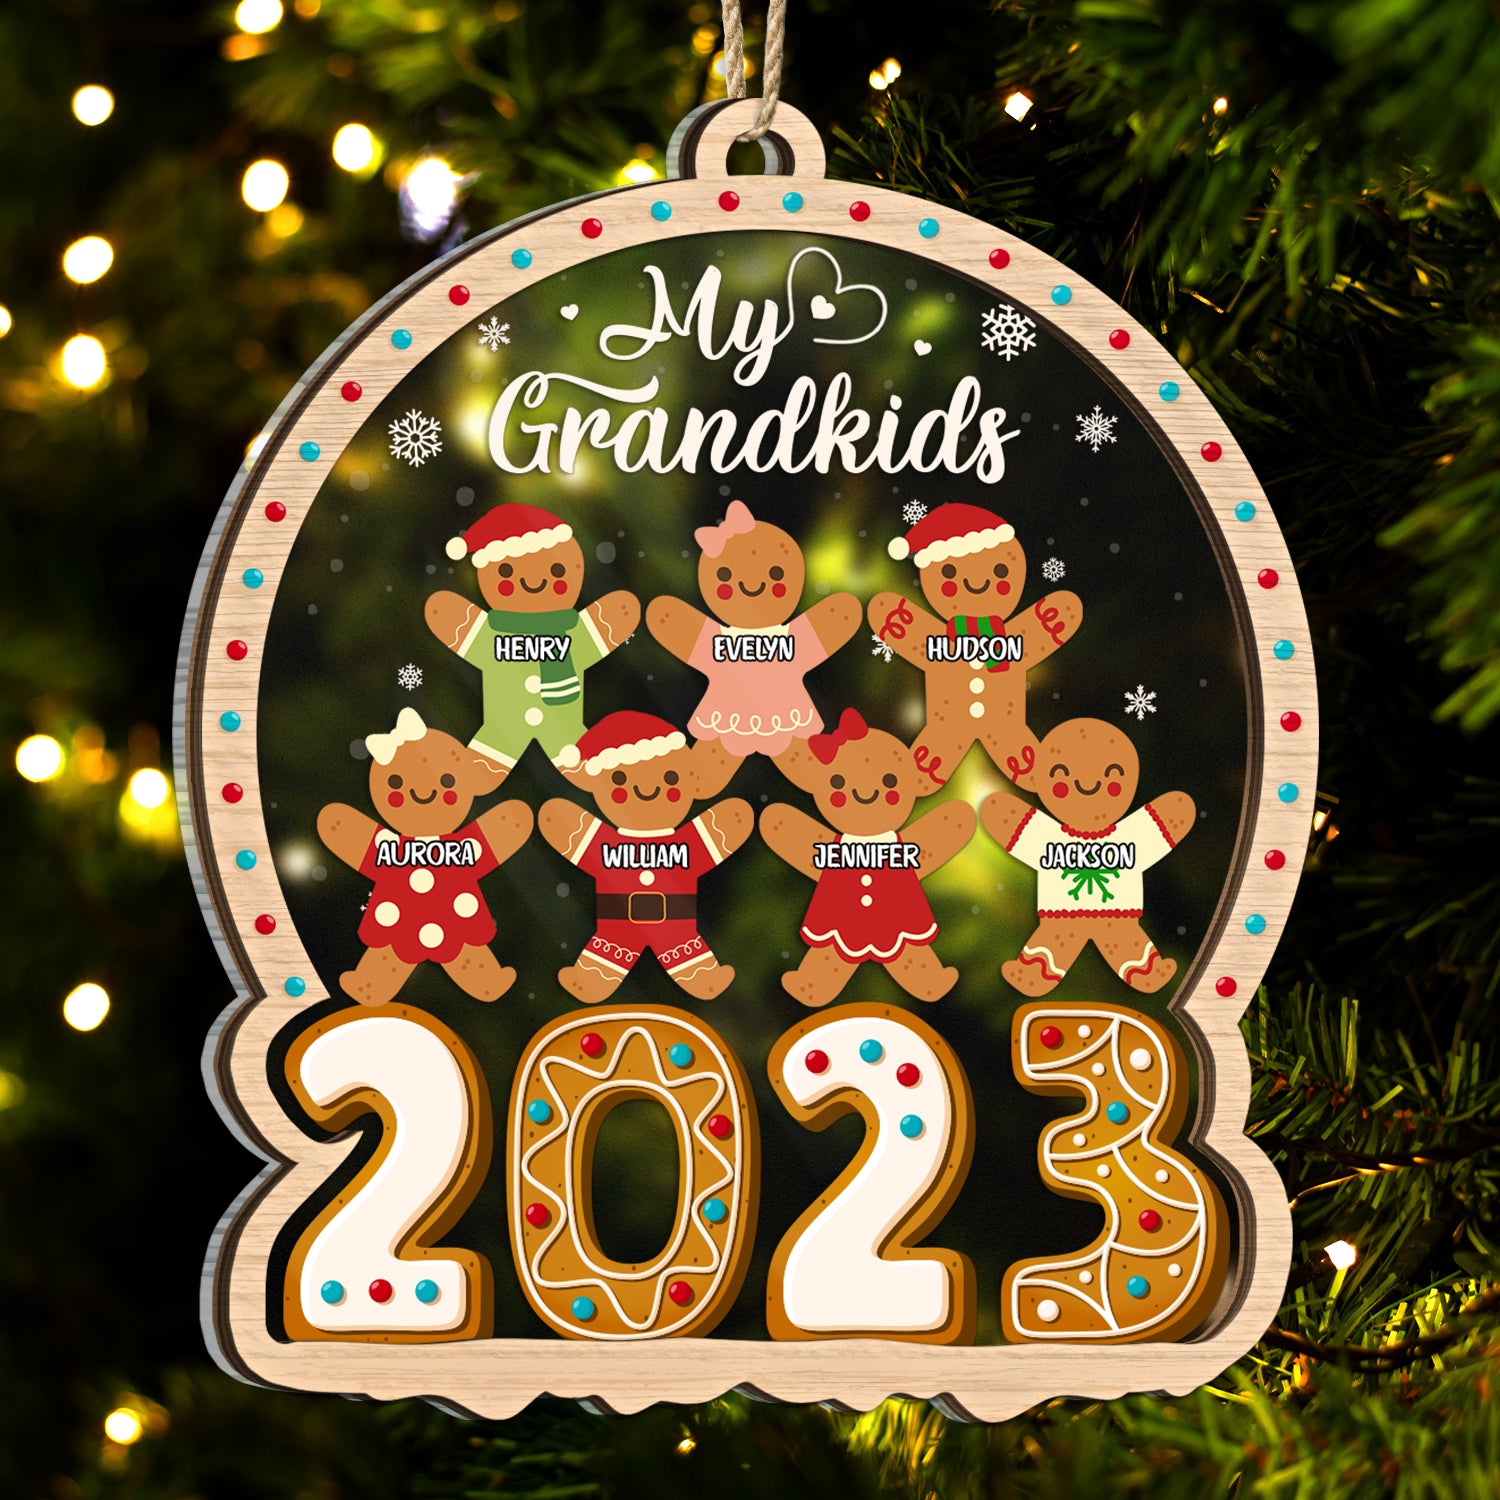 Gingerbread Cookies Our Grandkids - Christmas Gift For Grandma, Grandpa, Grandparents - Personalized 2-Layered Mix Ornament